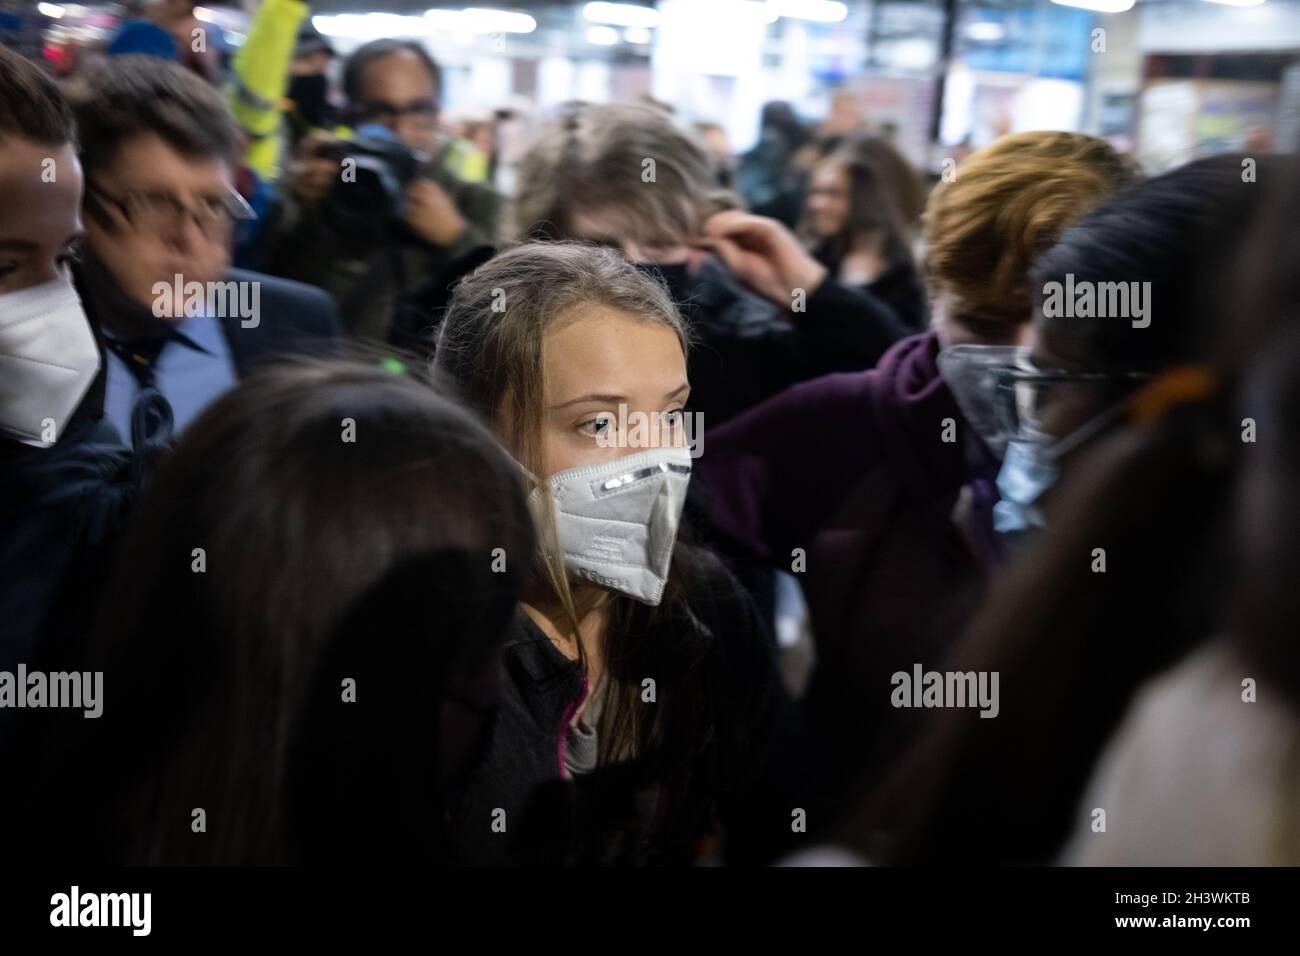 Glasgow, UK. Swedish climate activist Greta Thunberg arrives in the city, and is mobbed by press and fans, ahead of the 26th UN Climate Change Conference, known as COP26, in Glasgow, United Kingdom, on 30 October 2021. Photo credit: Jeremy Sutton-Hibbert/Alamy Live News. Stock Photo